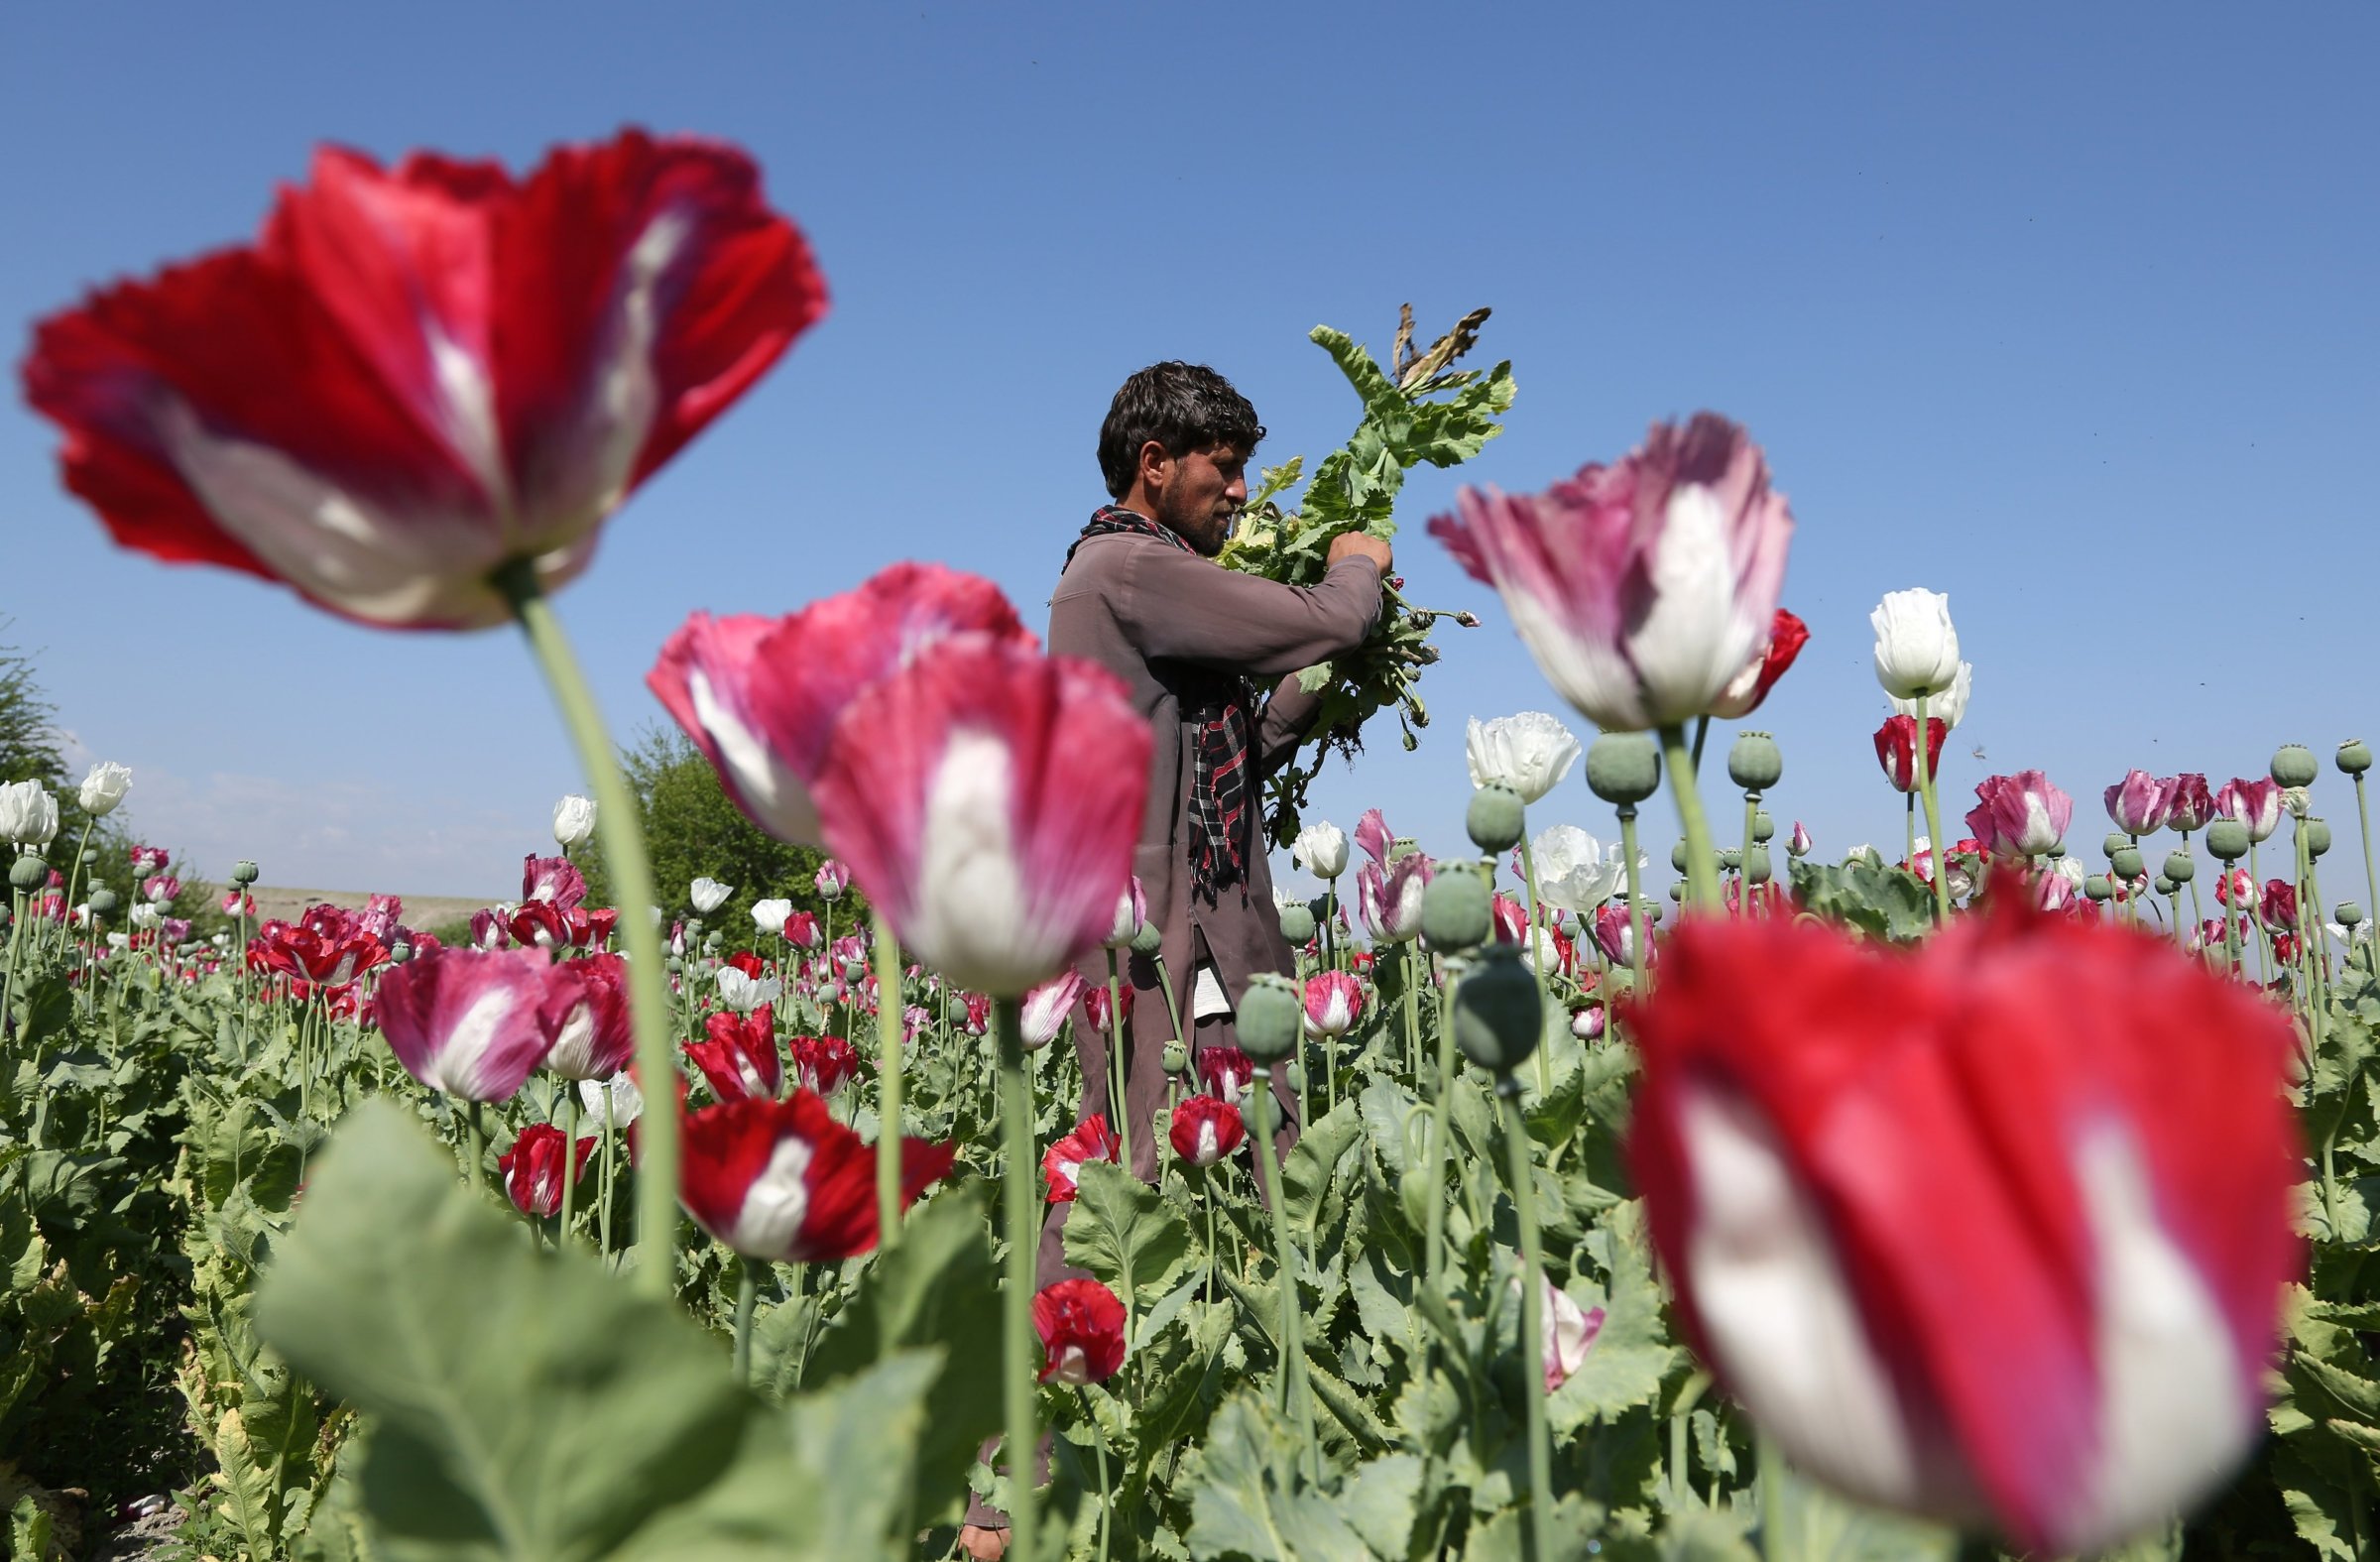 An Afghan farmer works on a poppy field collecting the green bulbs swollen with raw opium, the main ingredient in heroin, in the Khogyani district of Jalalabad, east of Kabul, Afghanistan, April 17, 2014.